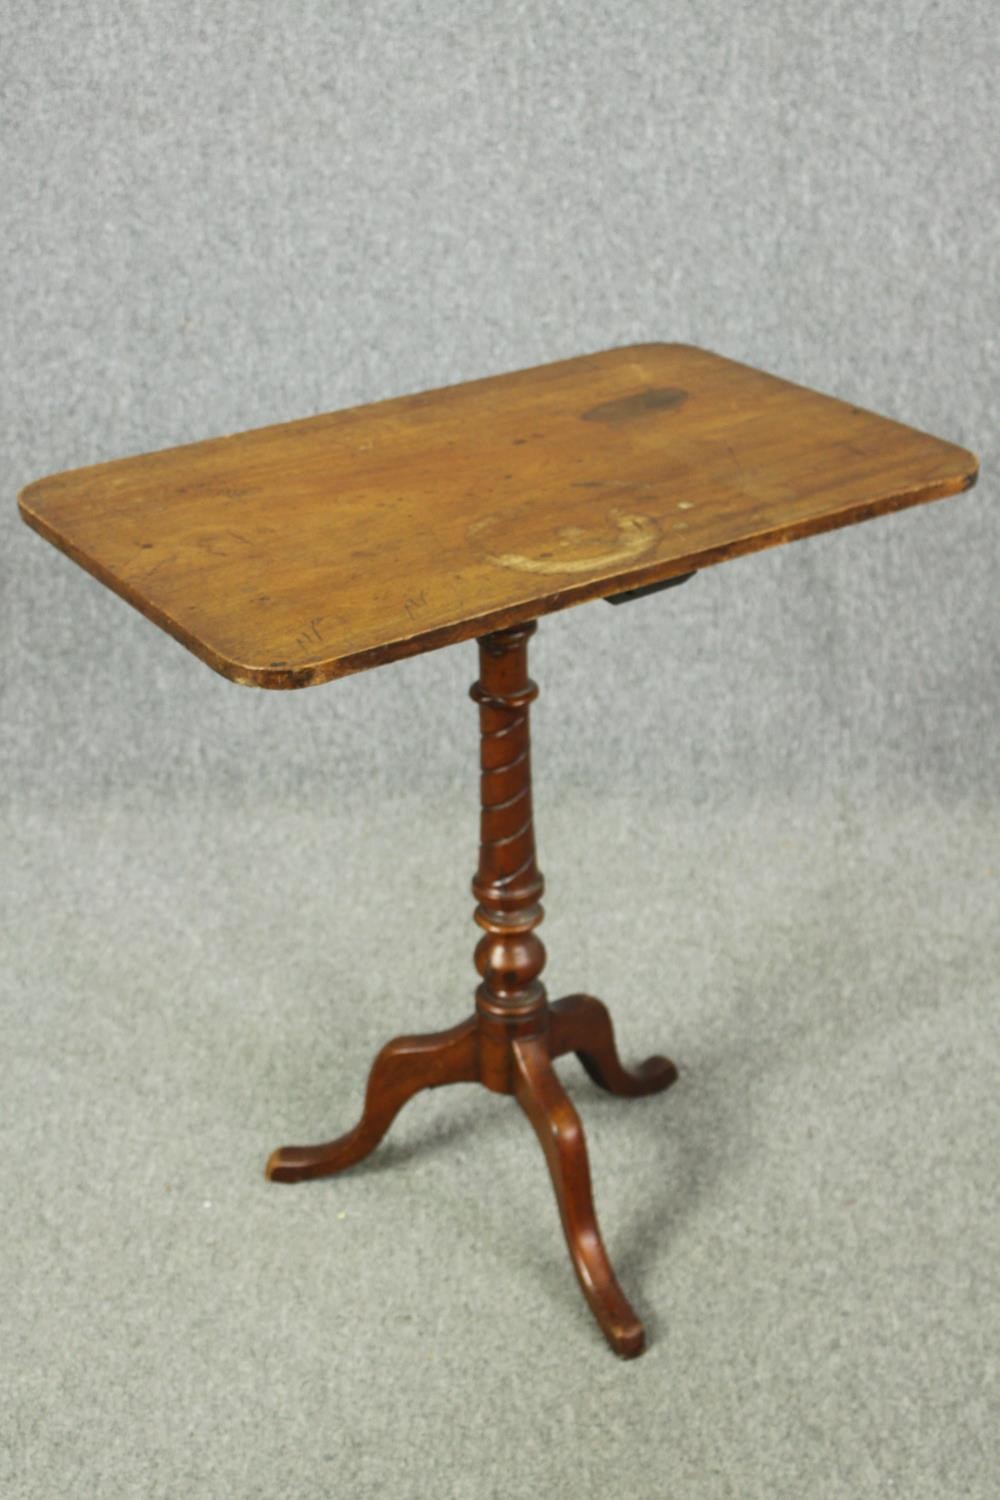 Occasional or lamp table, 19th century mahogany. H.71 W.66 D.43cm. - Image 3 of 6